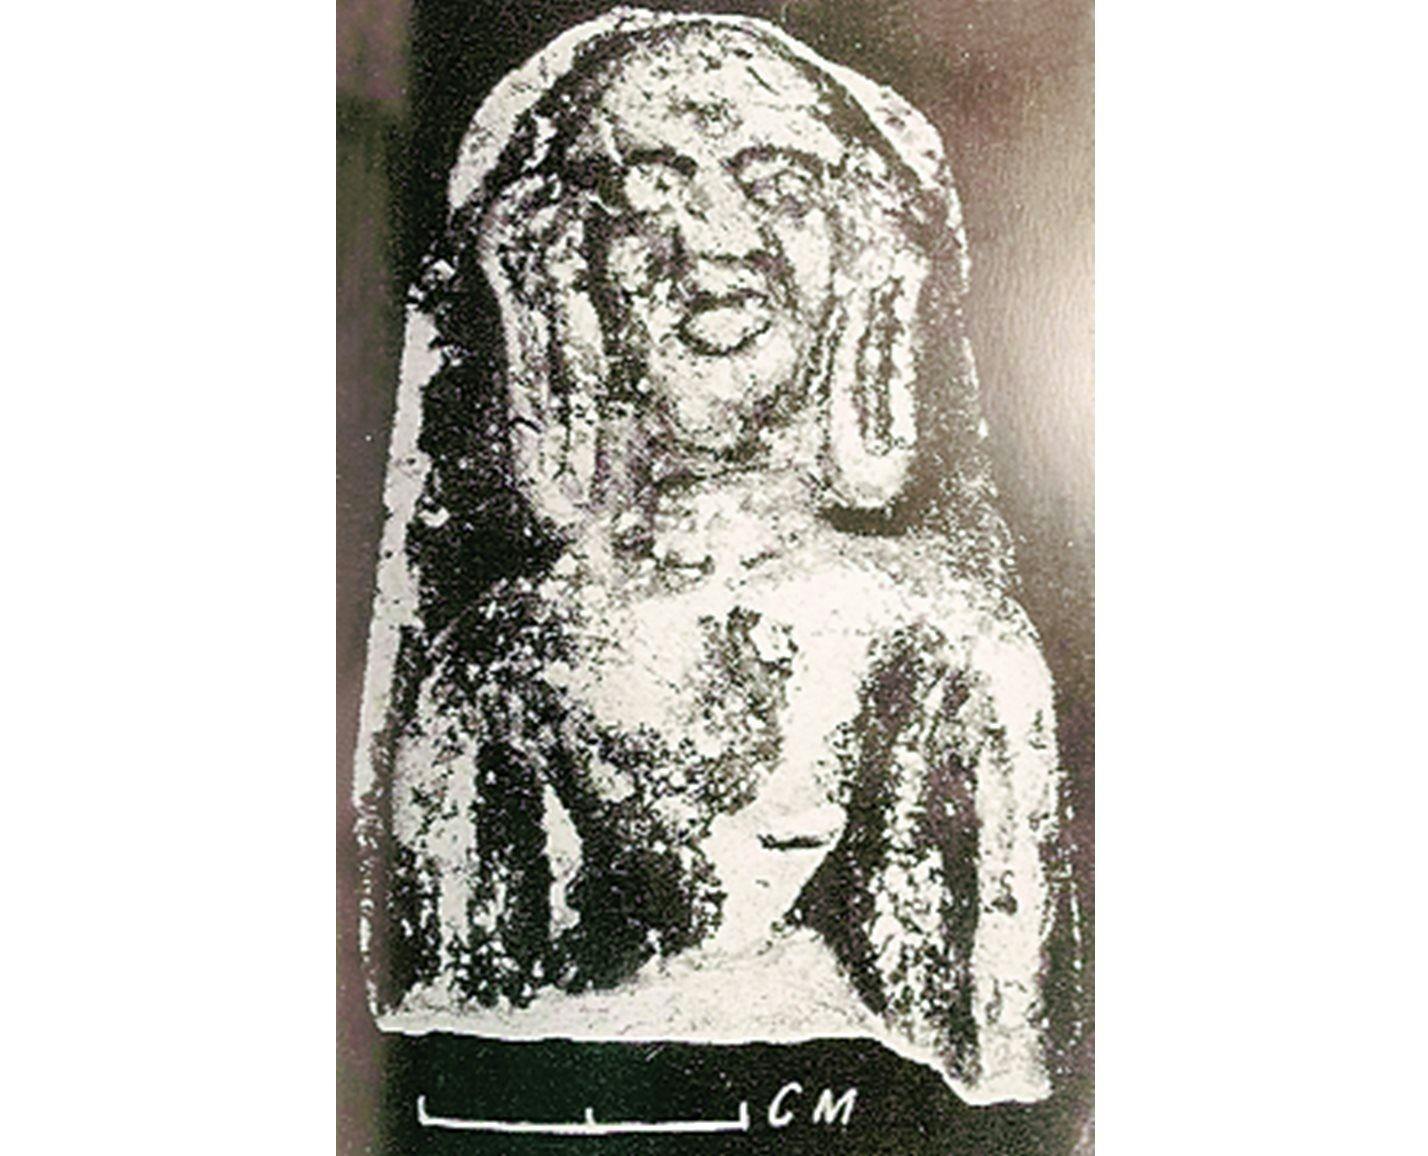 B B Lal conducted excavations in Ayodhya between 1975-76 and found a terracotta image showing a Jain ascetic